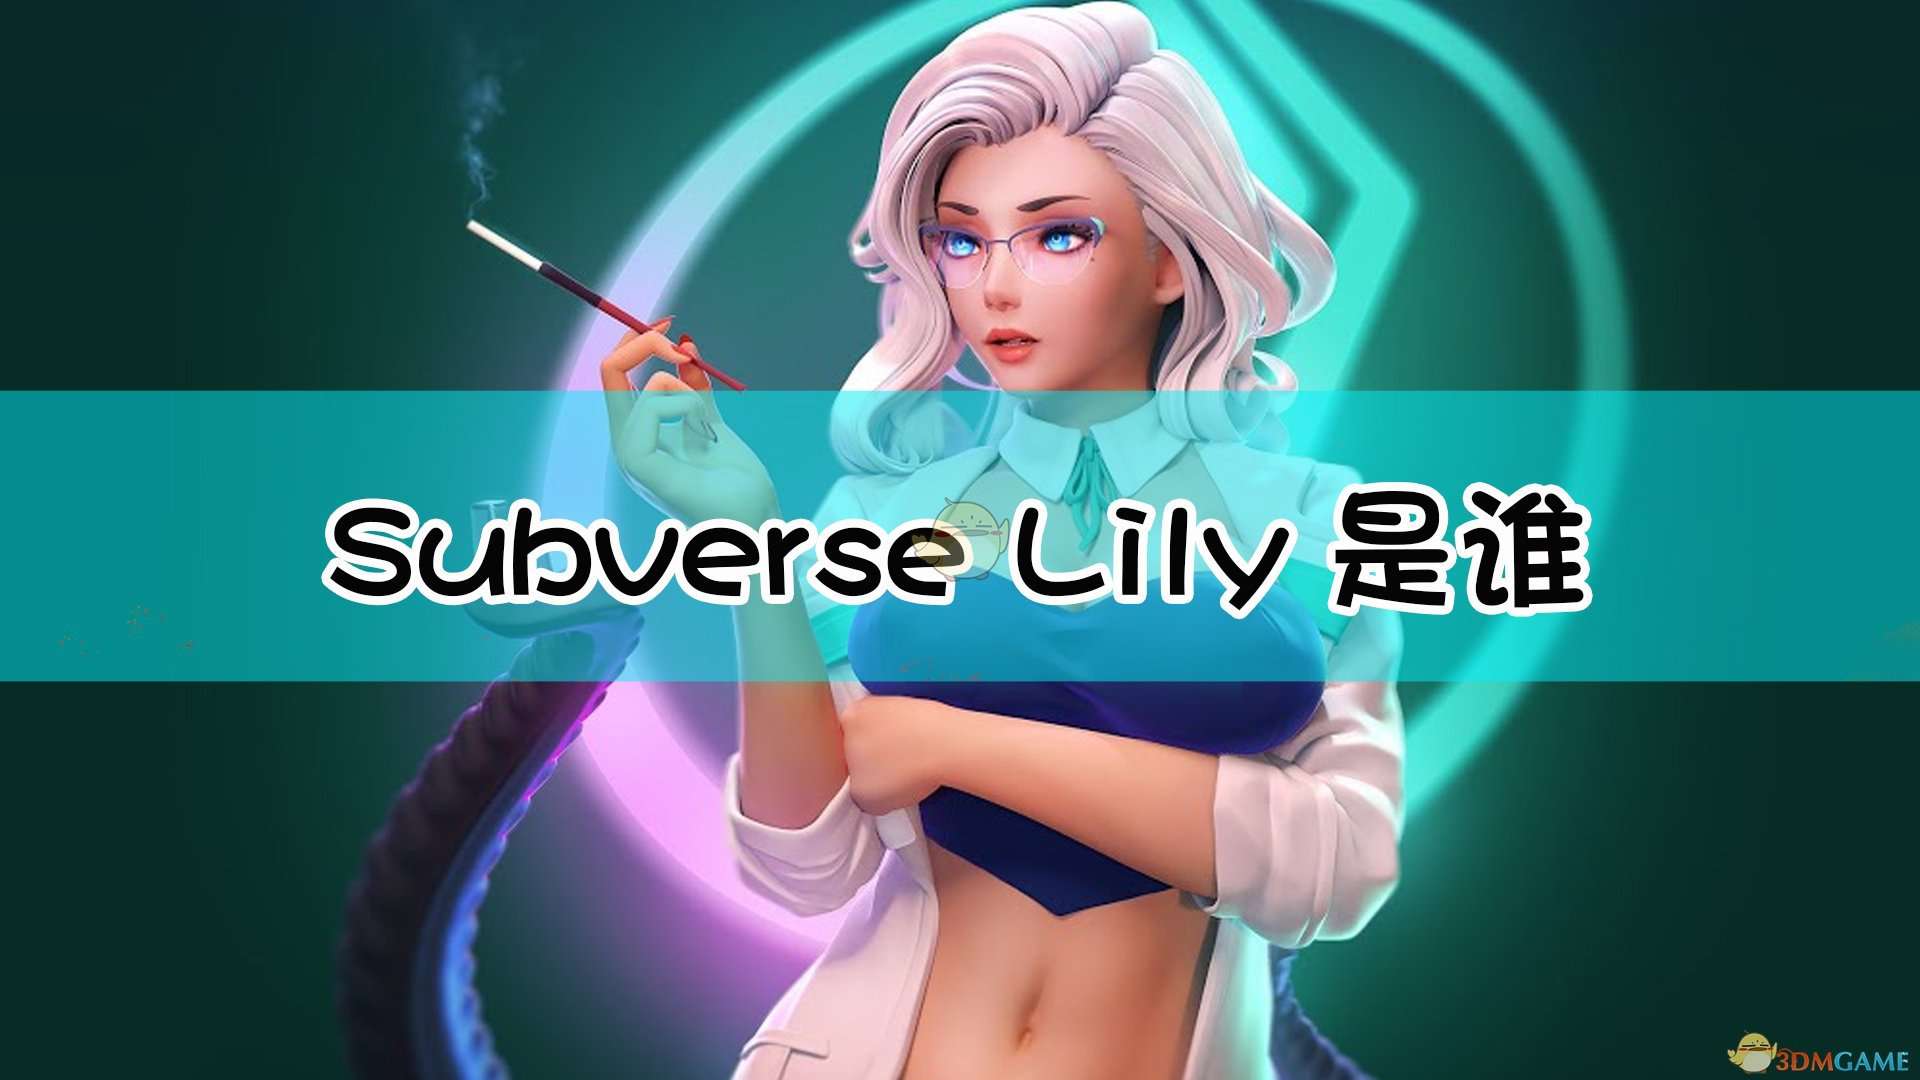 《Subverse》Lily角色背景设定介绍